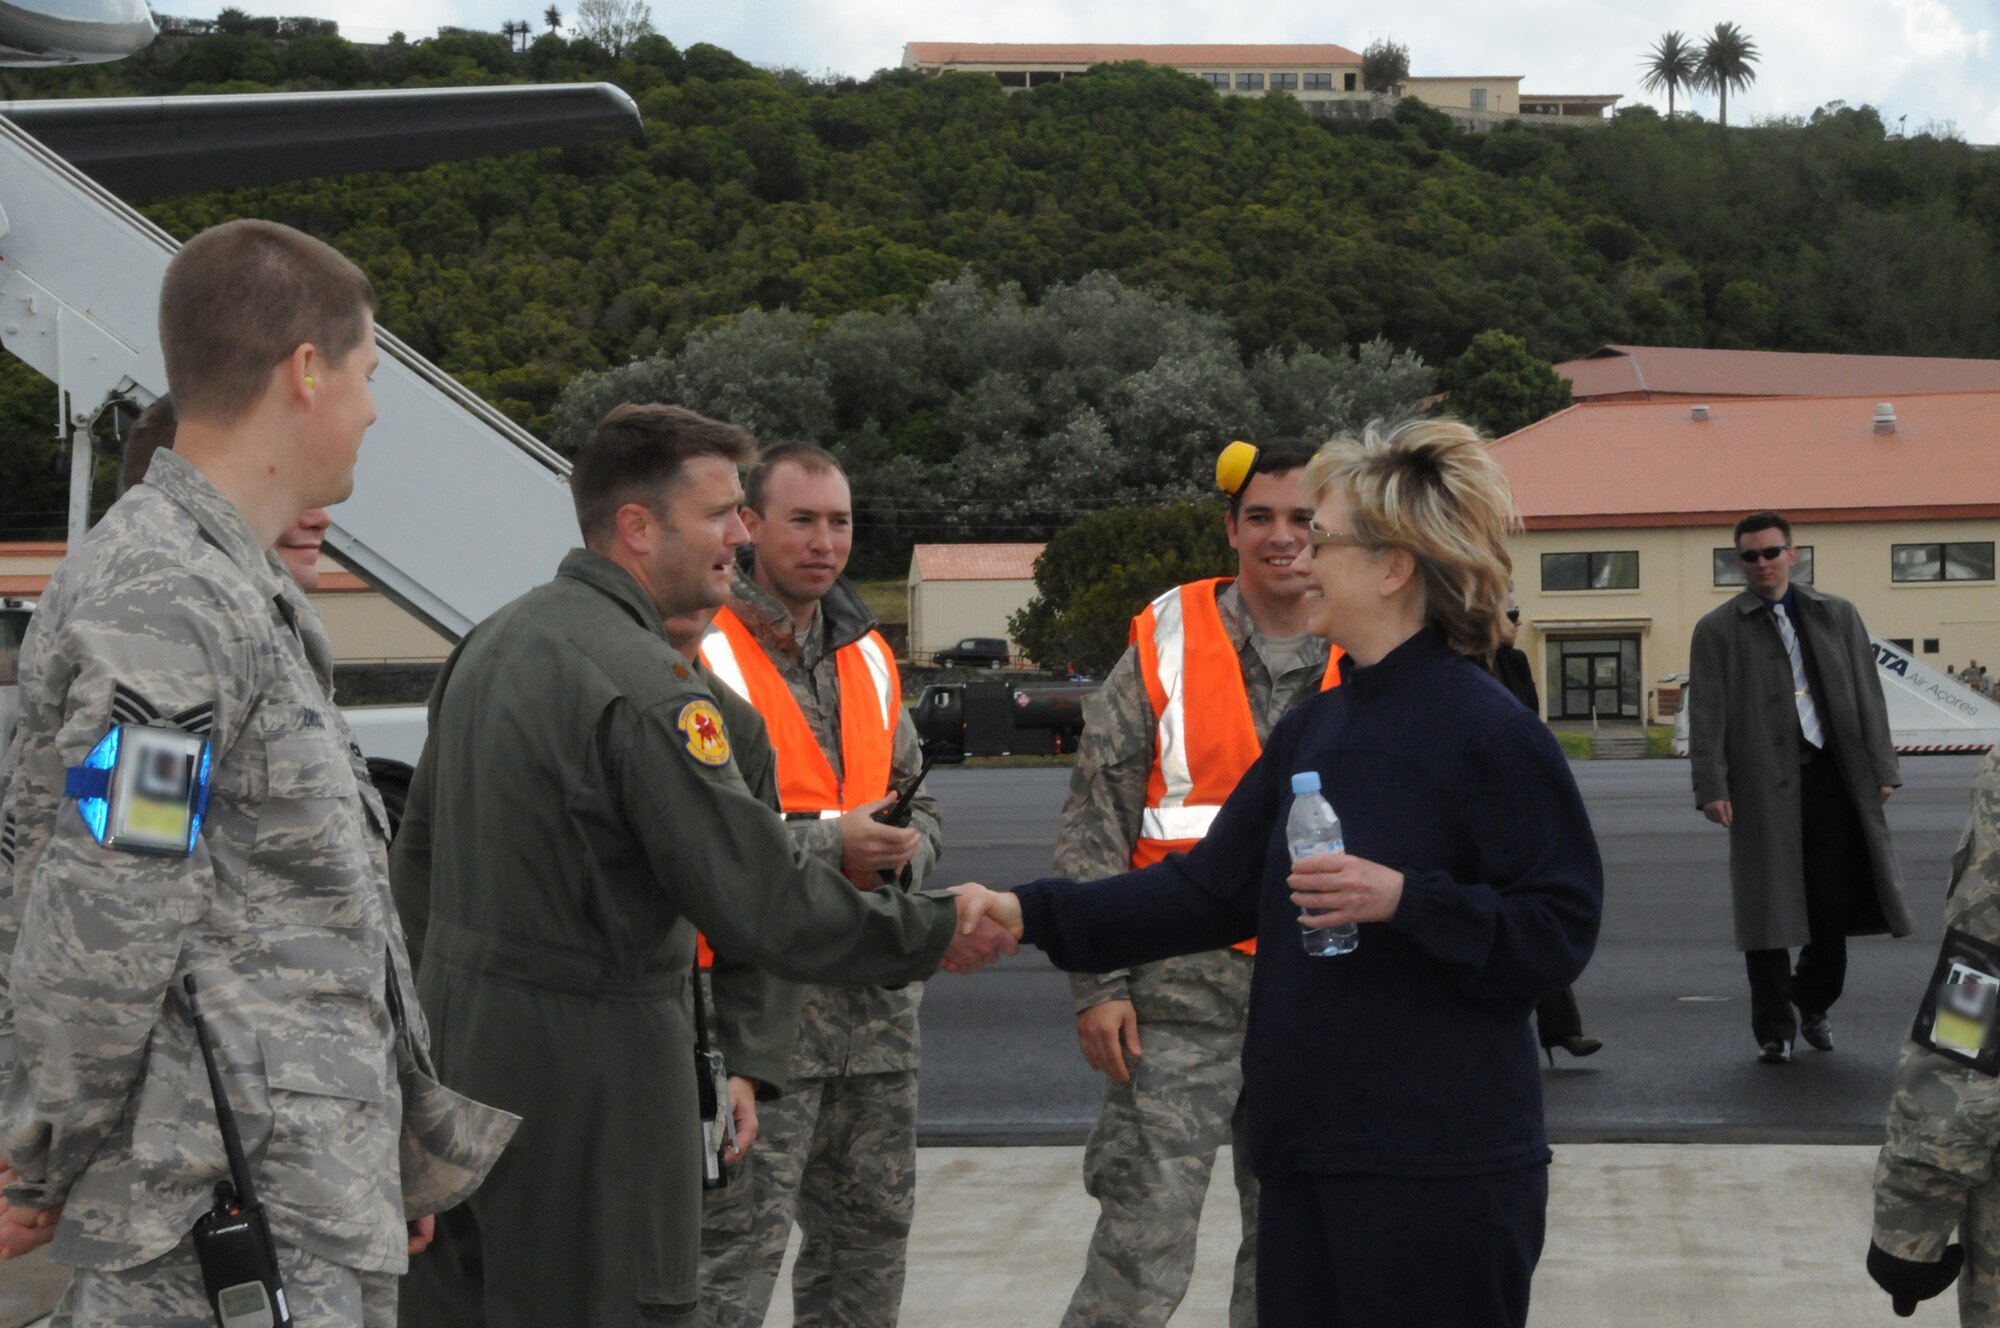 Secretary of State Hillary Rodham Clinton shakes hands with Maj. Jeff Banks, 65th Operations Support Squadron Director of Operations, at Lajes Field, Azores, Portugal on June 3.  Secretary Clinton stopped here en route to Cairo, Egypt to join President Barack Obama for his speech, and participate in the President's meeting with President Hosni Mubarak.  (U.S. Air Force photo by Tech Sgt. Rebecca F. Corey)